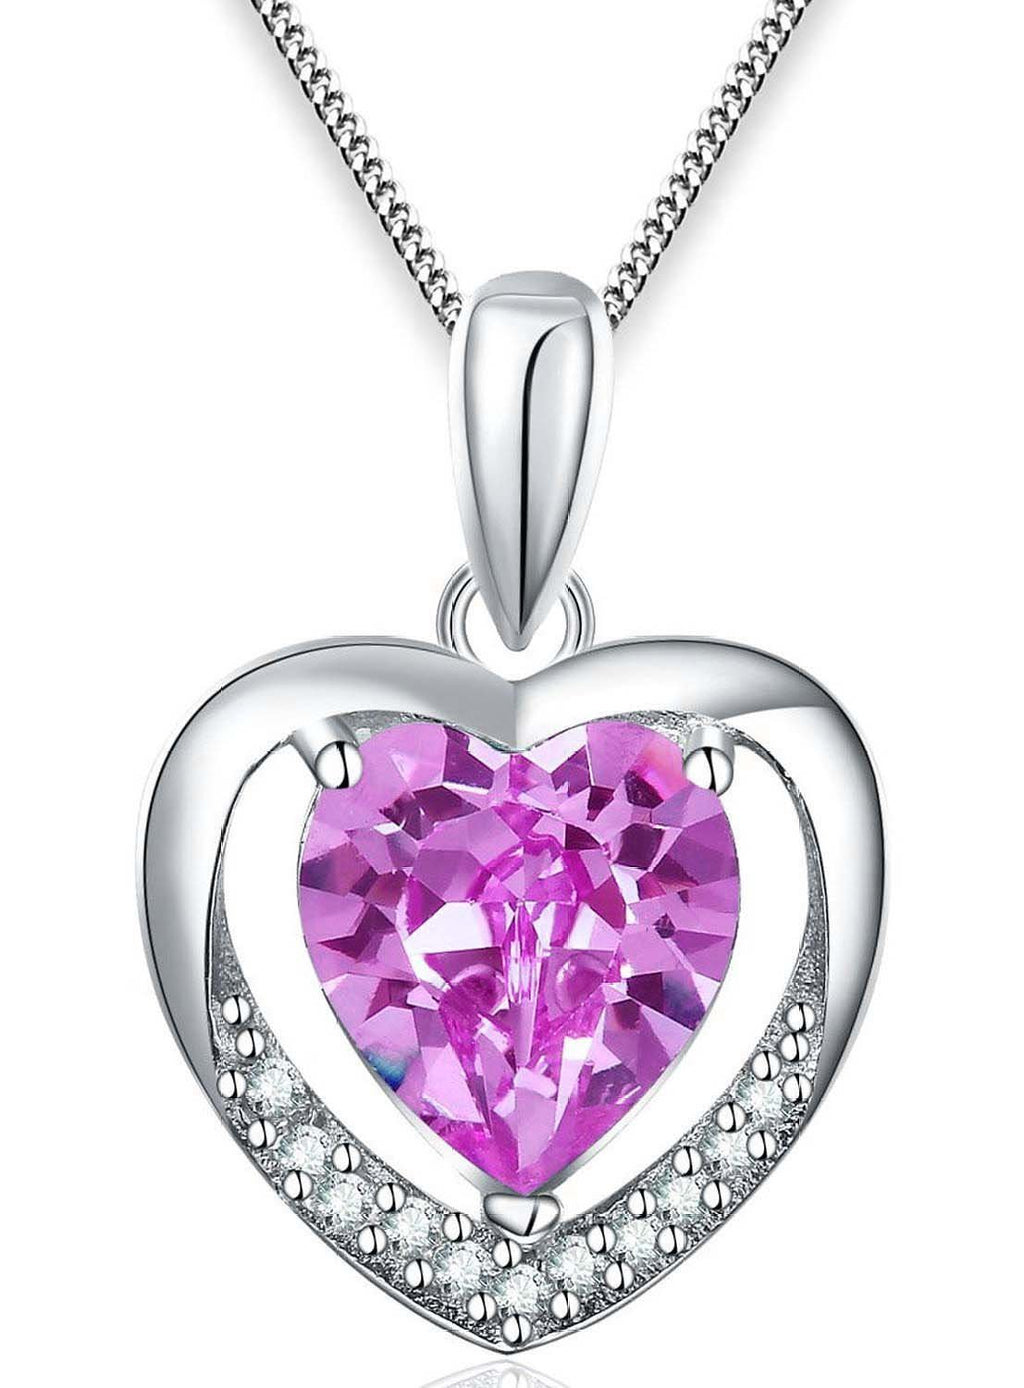 [Australia] - findout Heart Necklace for women sterling Silver Friendship Cubic Zirconia Blue Pink Amethyst Heart Crystal Pendant Necklace Gift For Women Girls With Jewellery Box silver Chain(f1700) Purple 